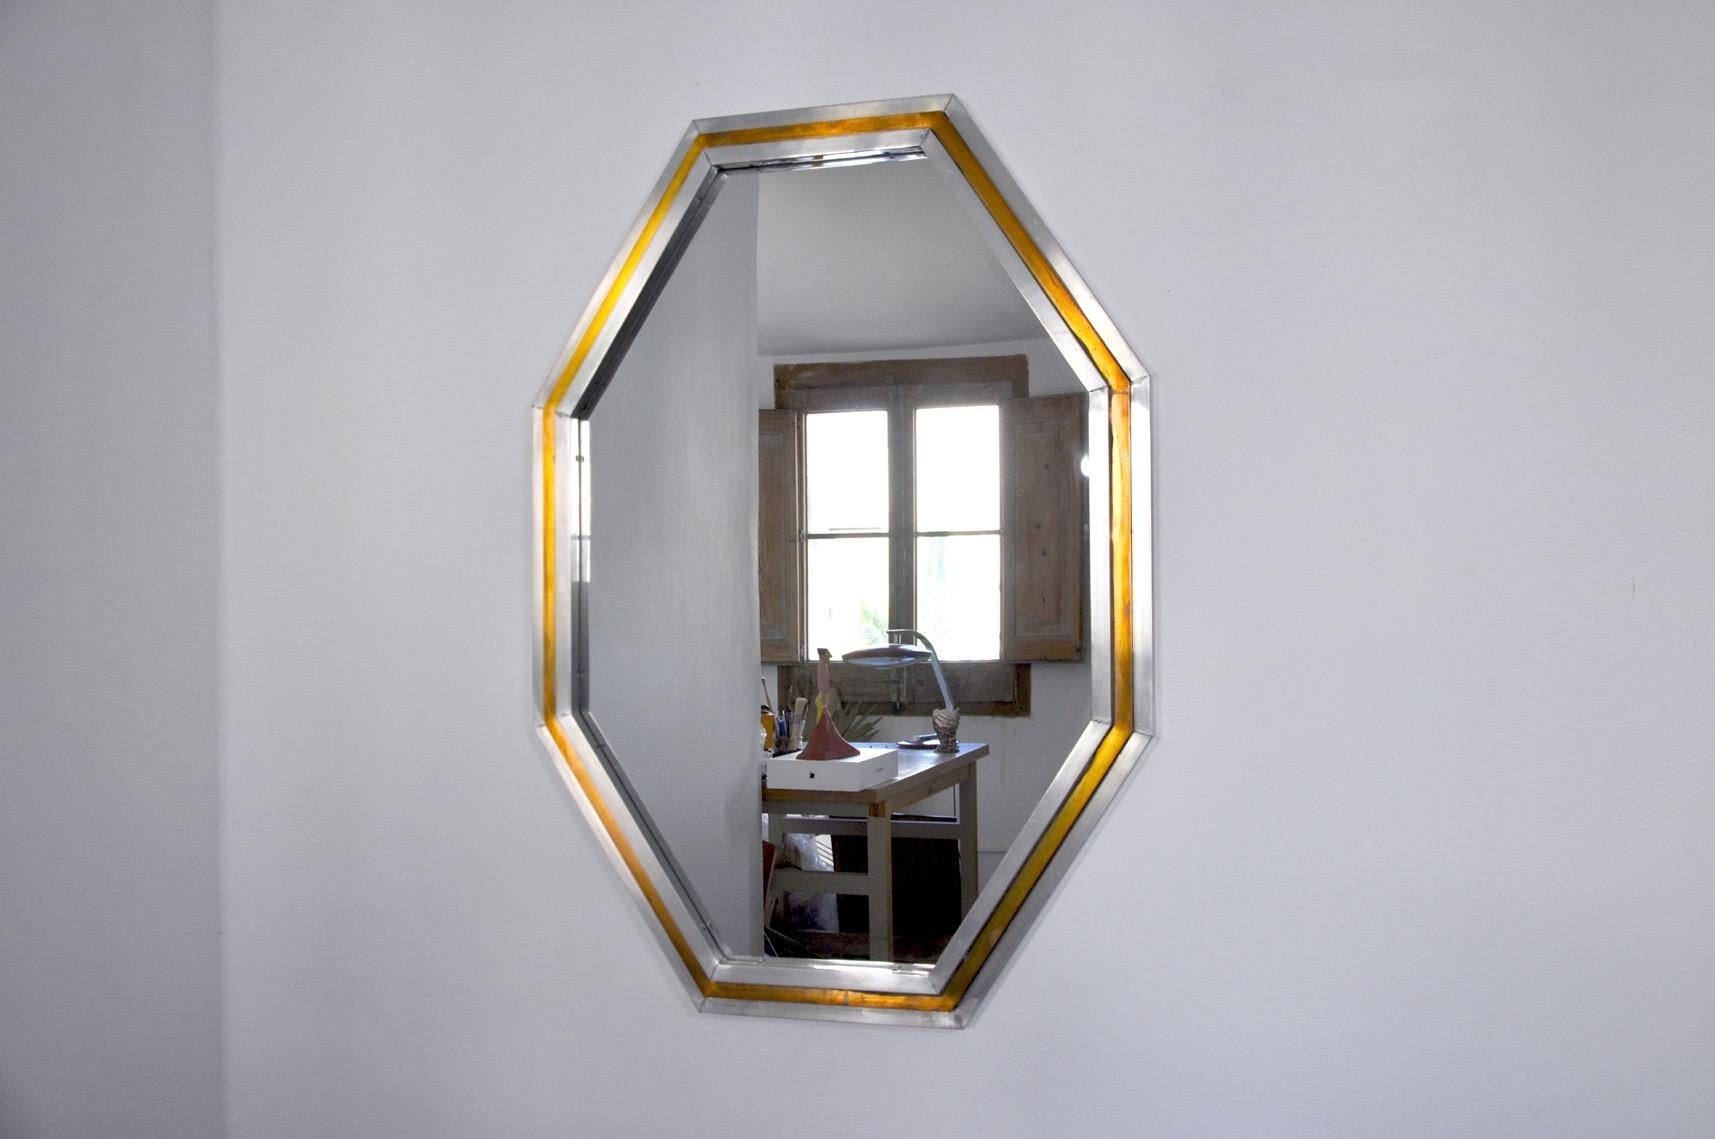 Superb and large octagonal mirror by romeo regga designated and produced in Italy in the 1970s. Brass and metal structure with a superb rare patina design object that will decorate your interior wonderfully. Marks of time relating to the age of the